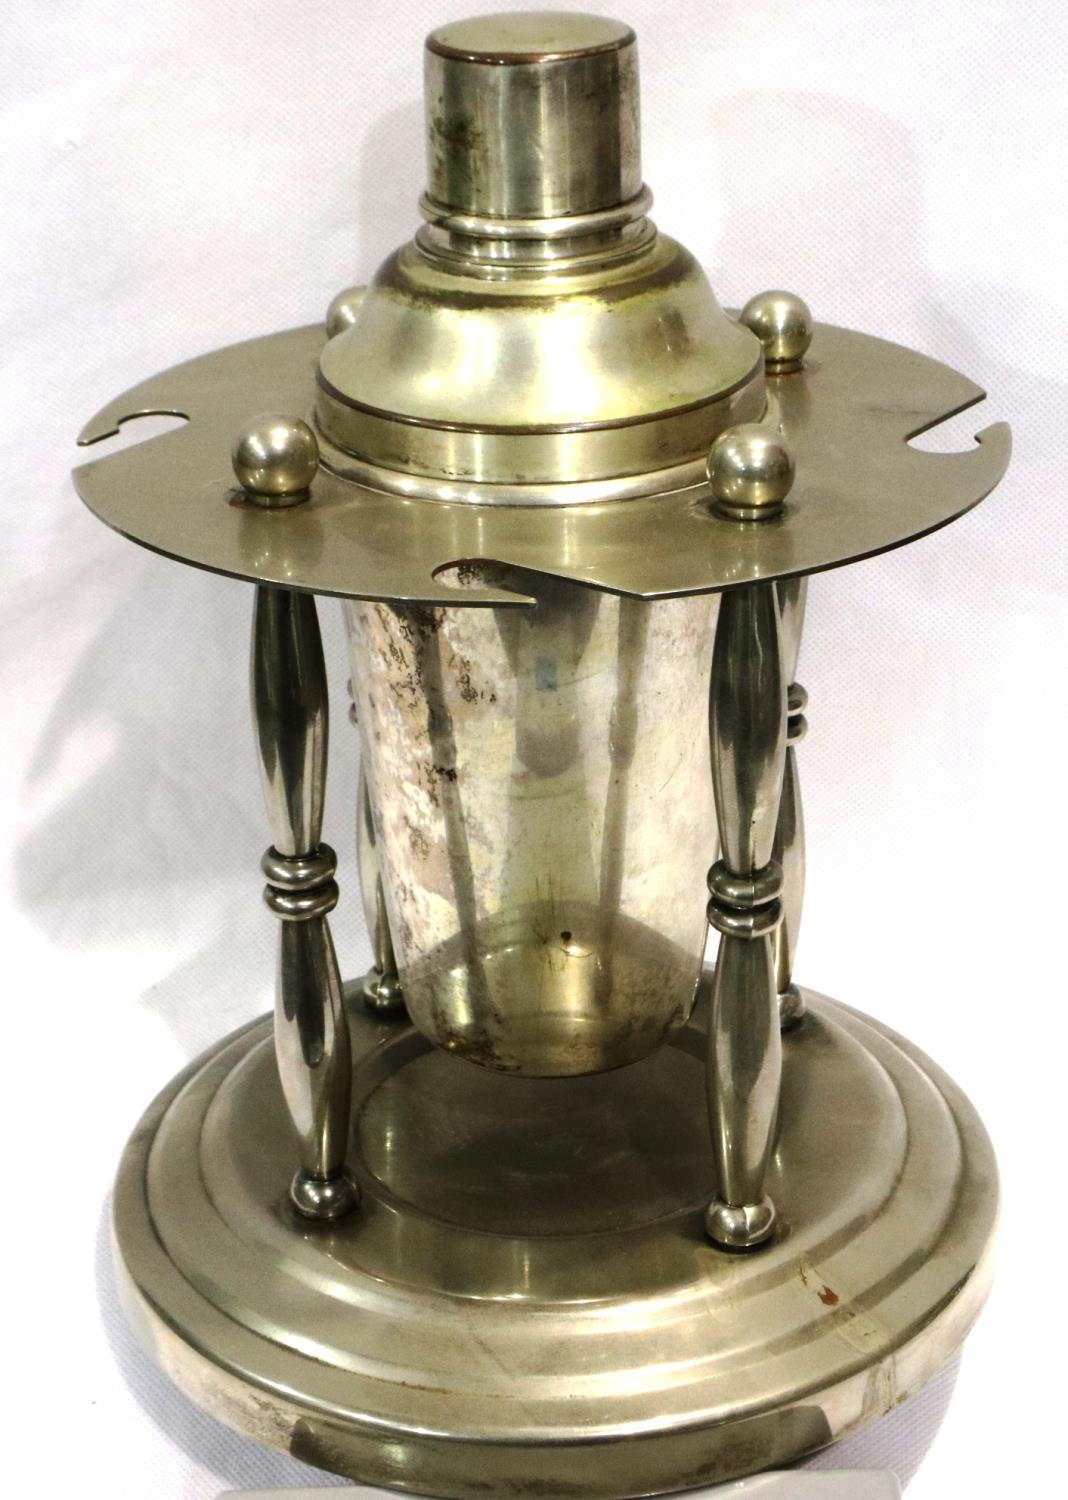 P H Vogel & Co silver plated cocktail shaker and stand, circa 1940, H: 26 cm. P&P Group 2 (£18+VAT